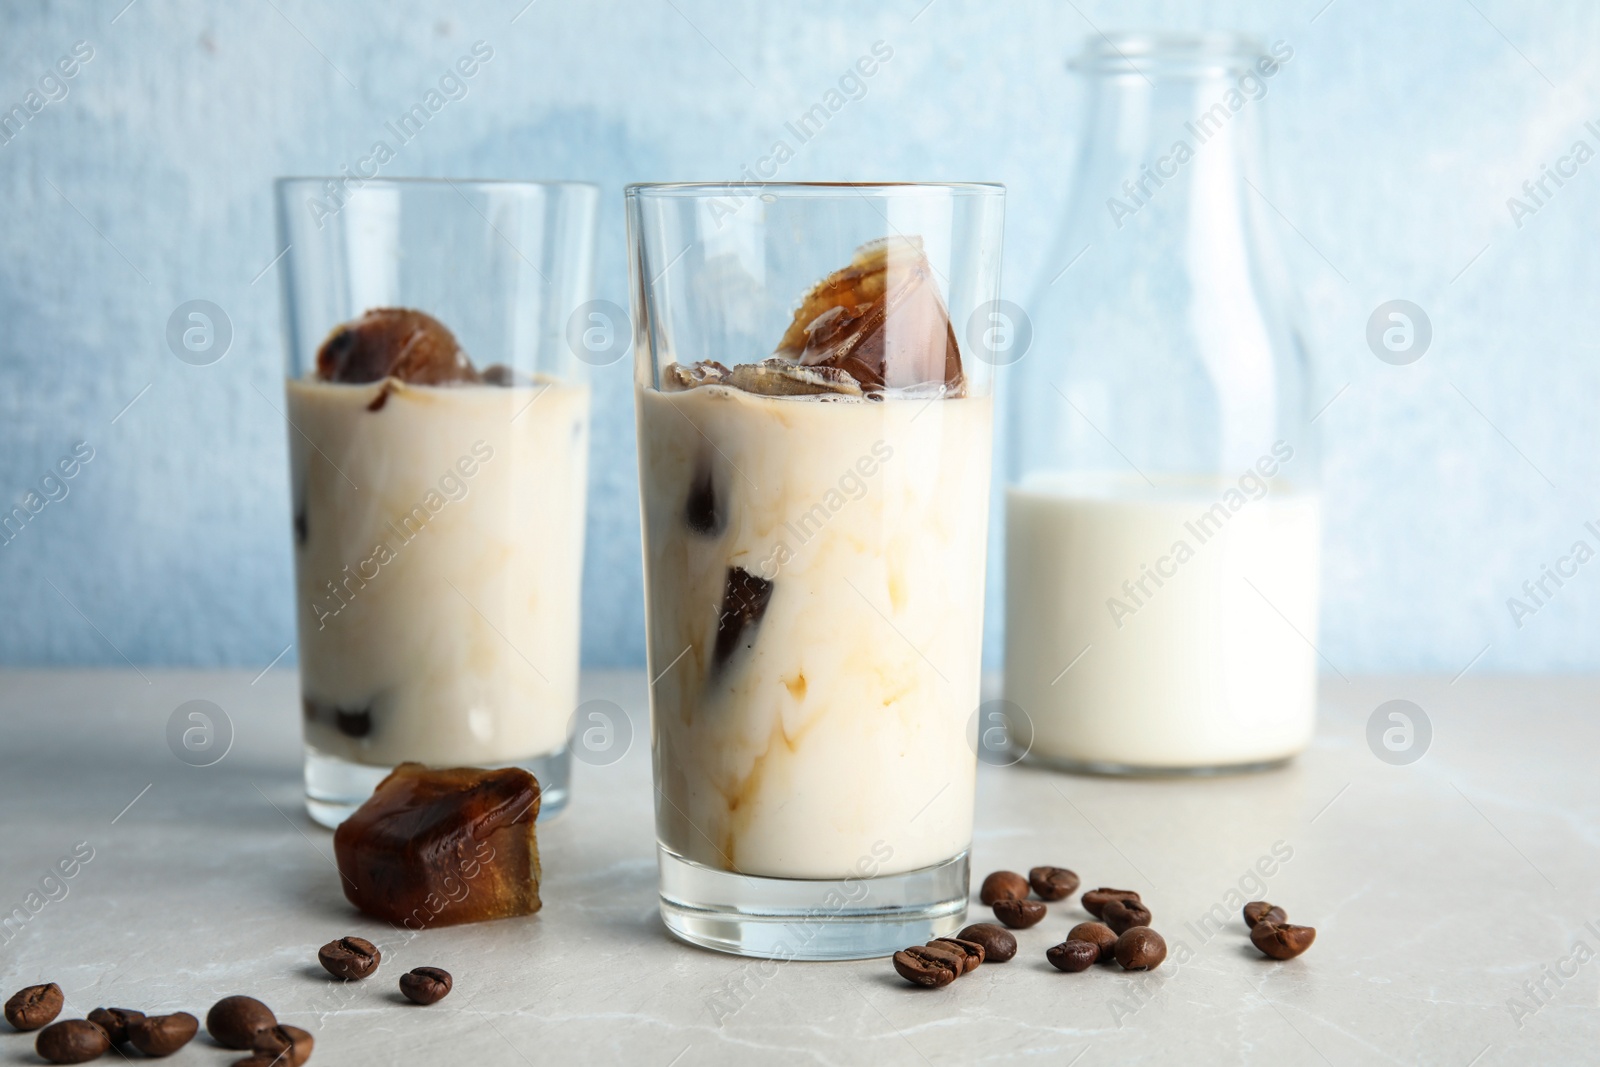 Photo of Glasses of milk with coffee ice cubes and beans on table against color background